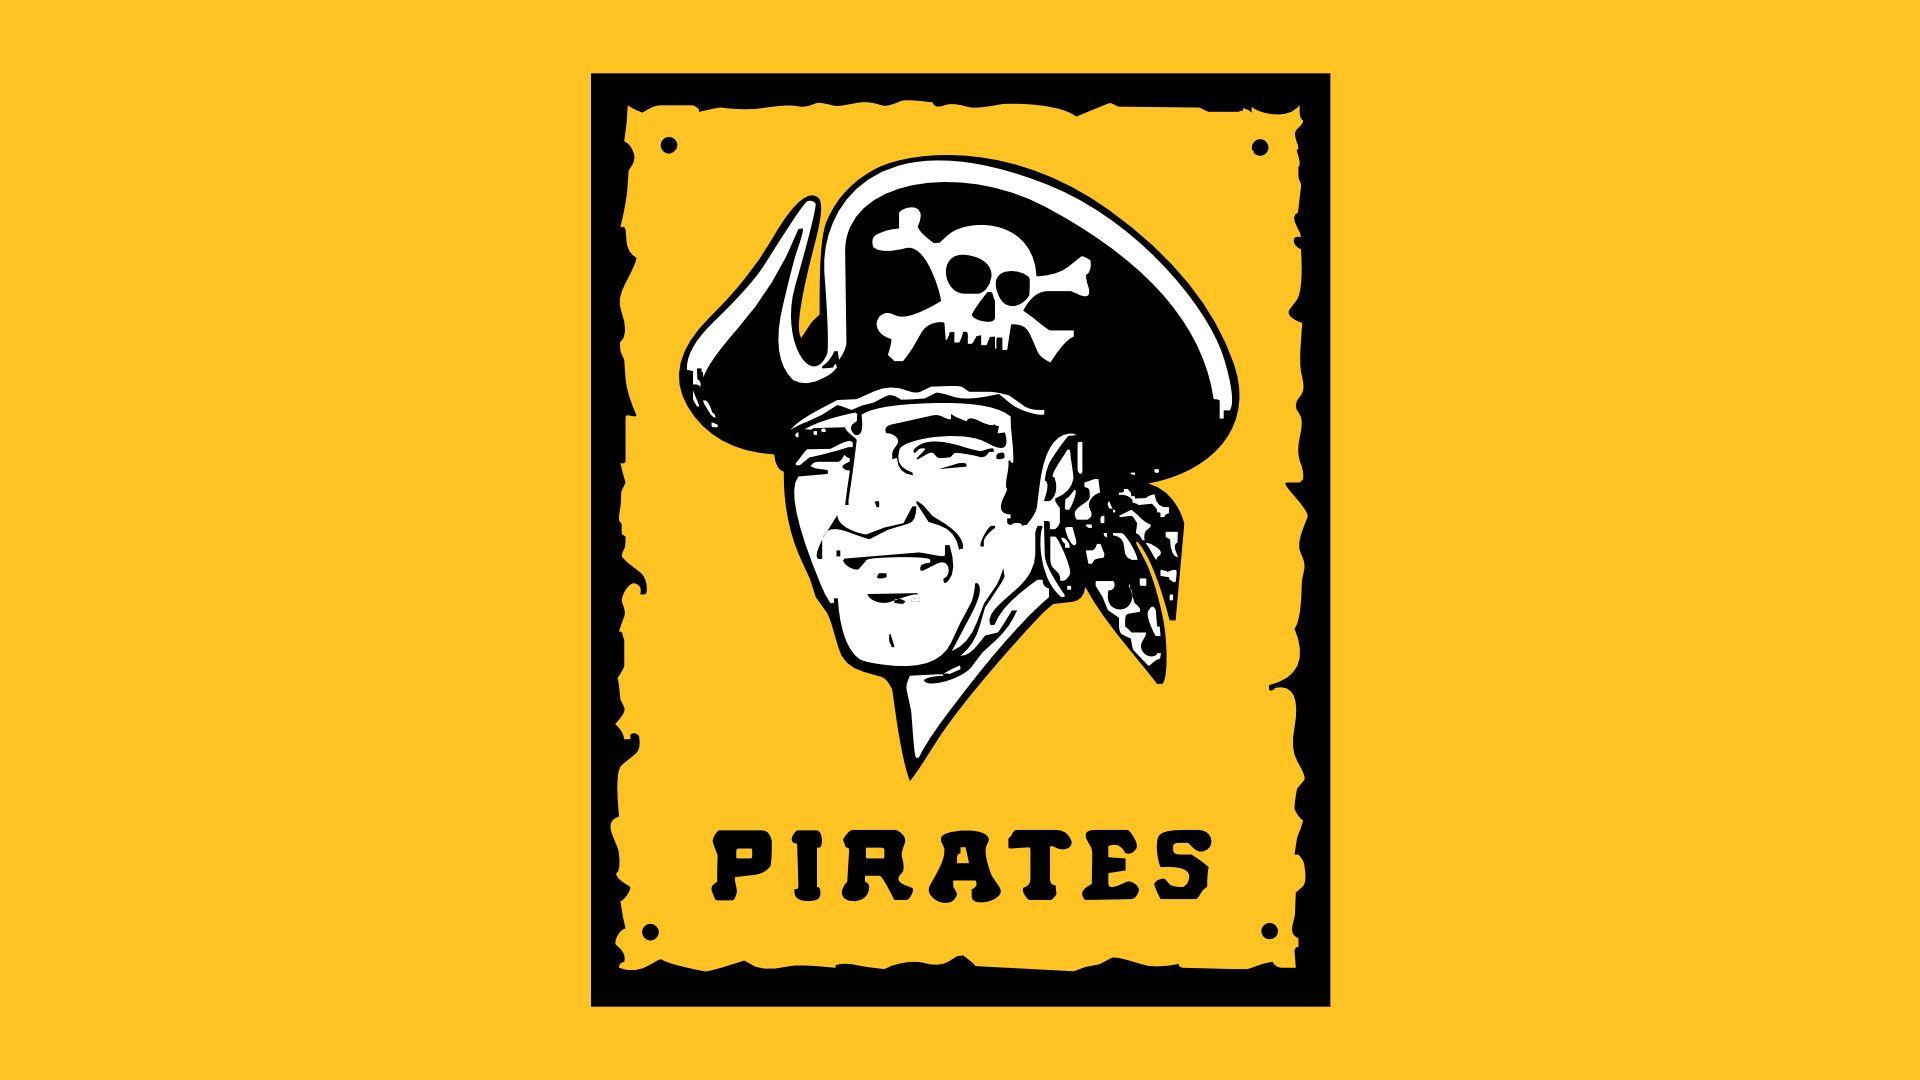 Pittsburgh Pirates Wallpaper and Background Image